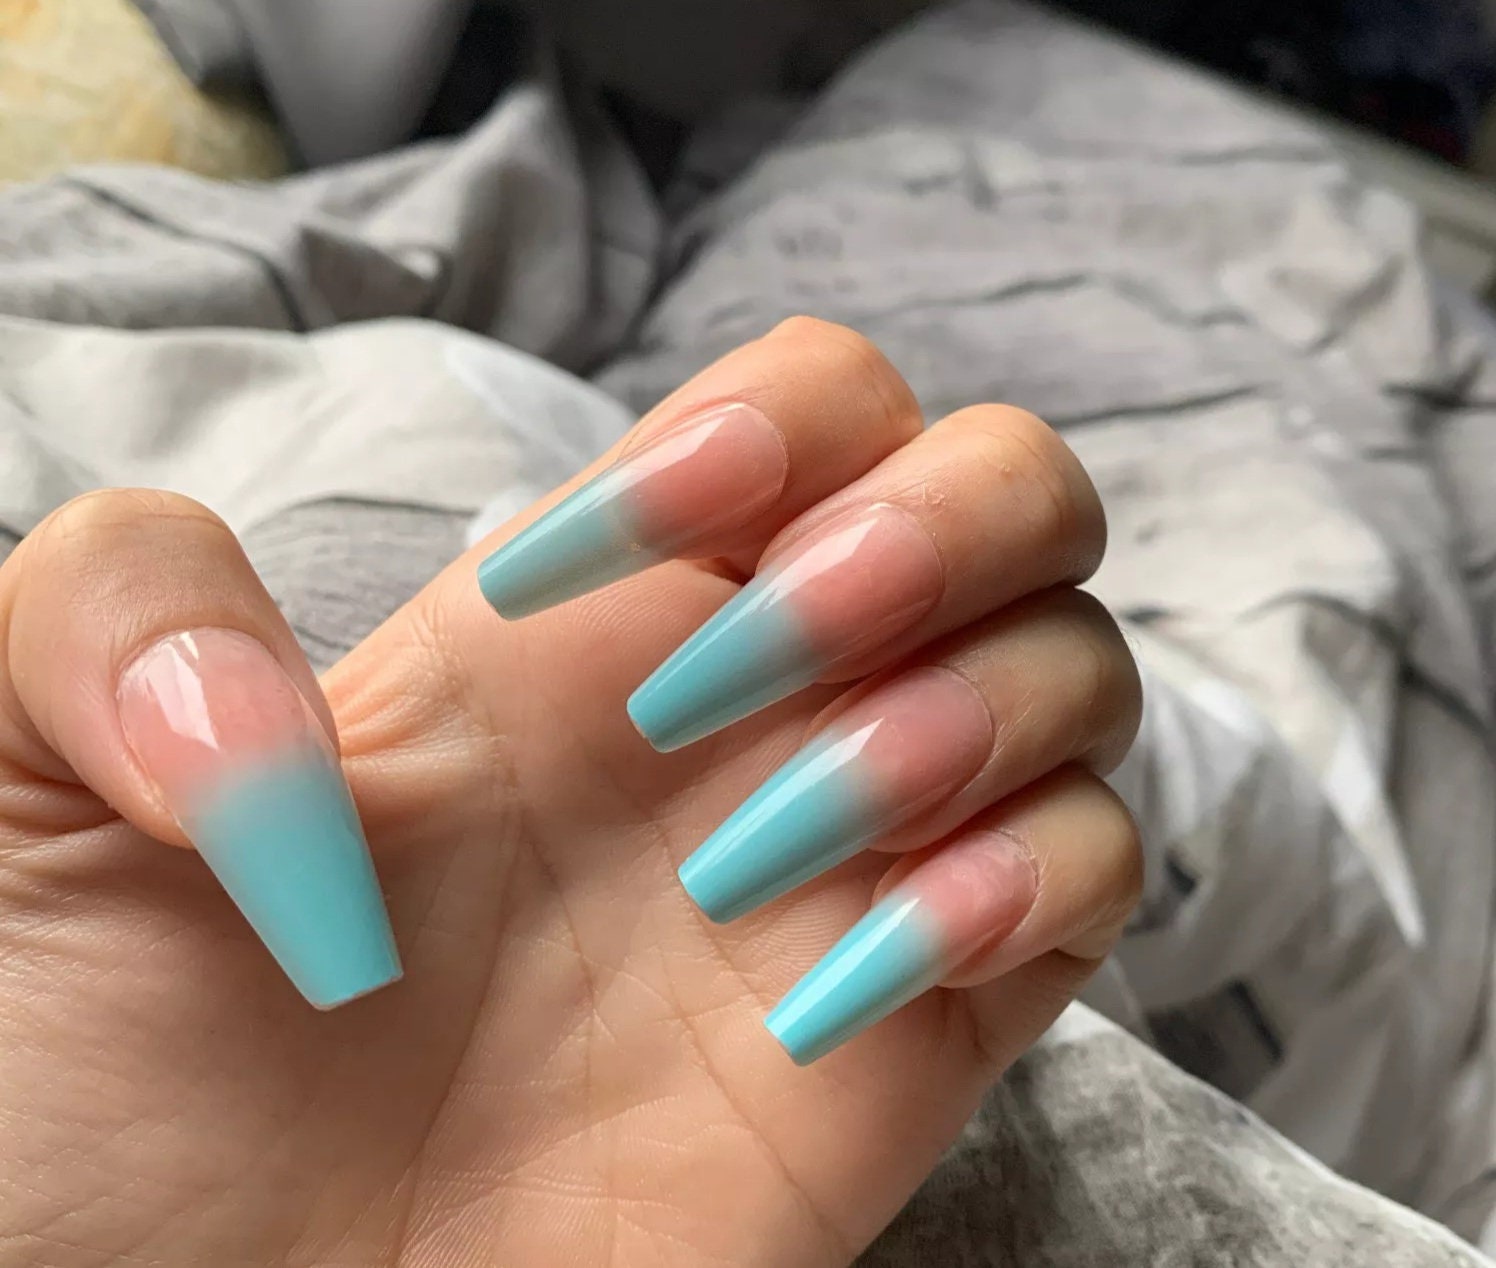 24 Blue Teal Ombre Summer Extra Long Press on nails glue on Coffin manicure